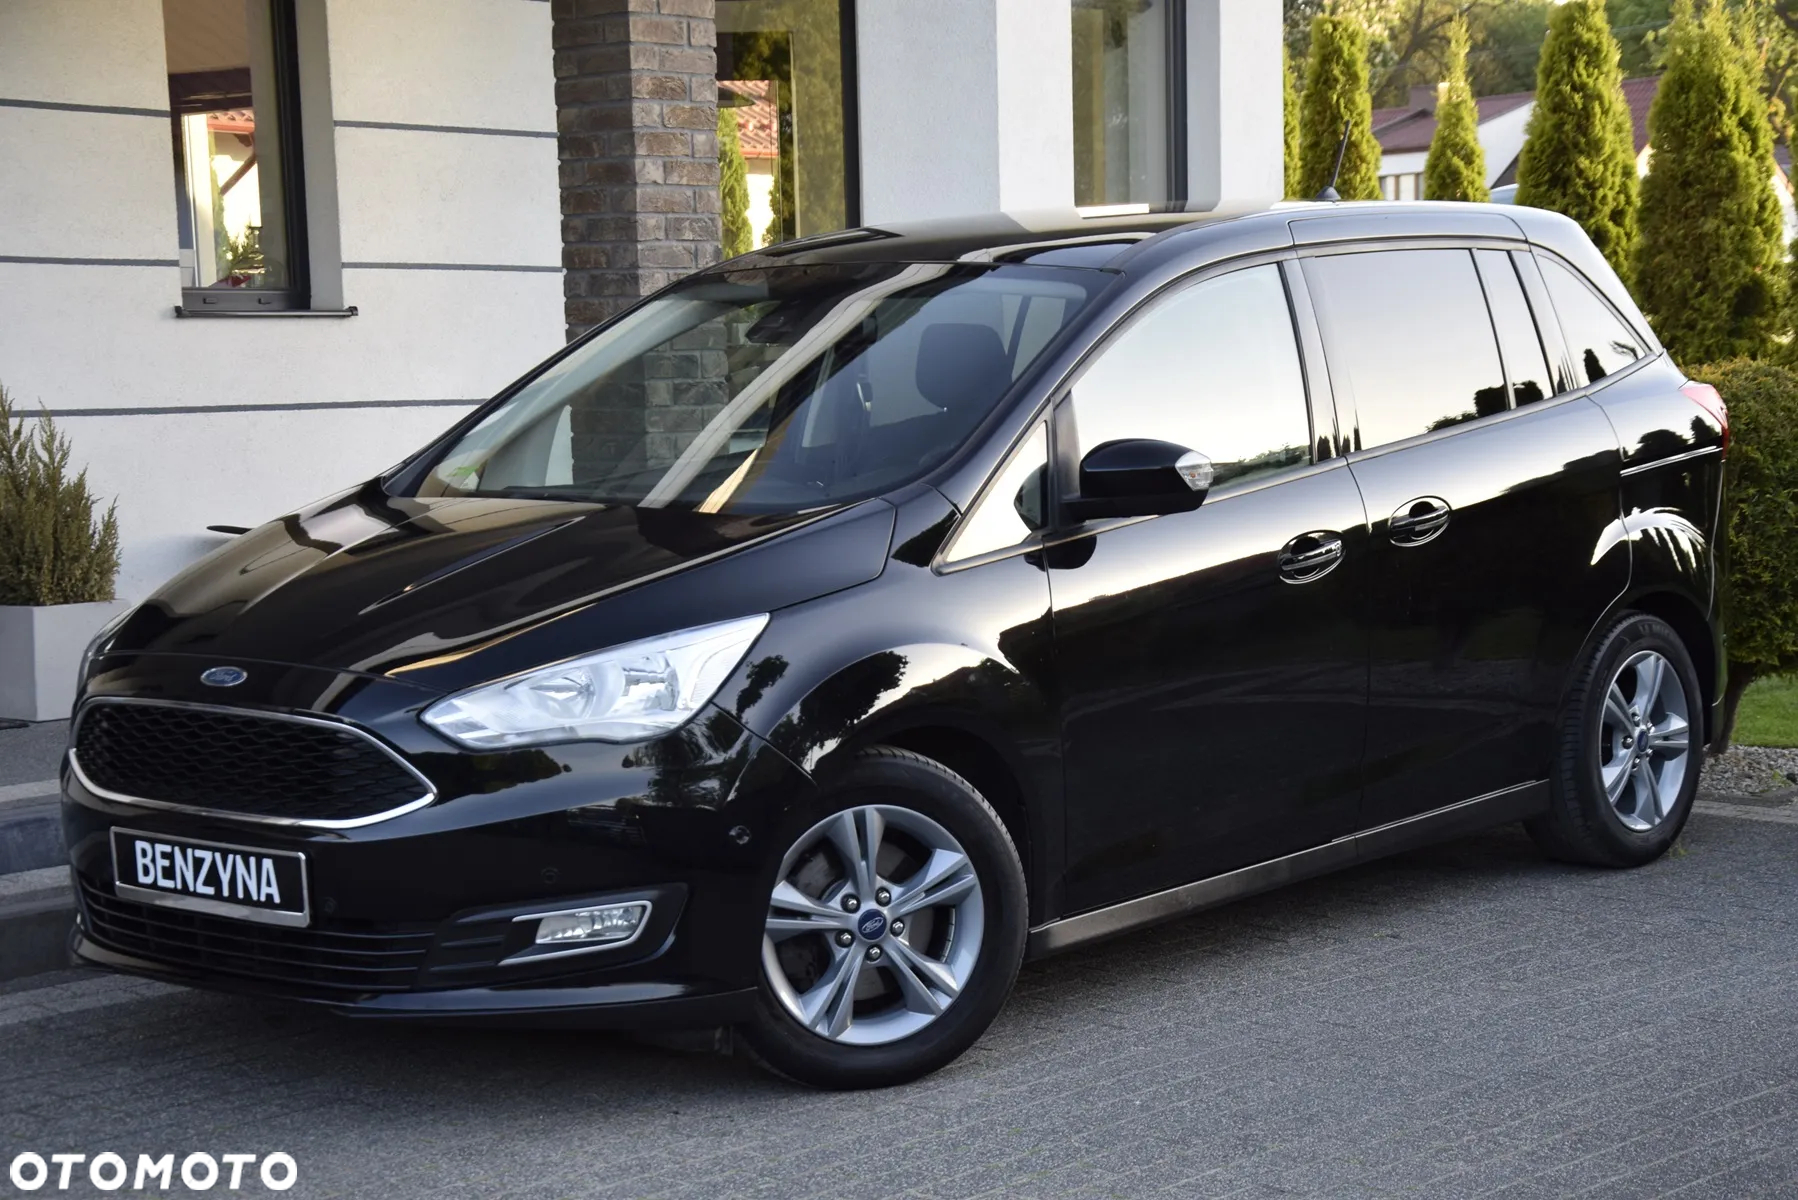 Ford Grand C-MAX 1.0 EcoBoost Start-Stopp-System Business Edition - 9